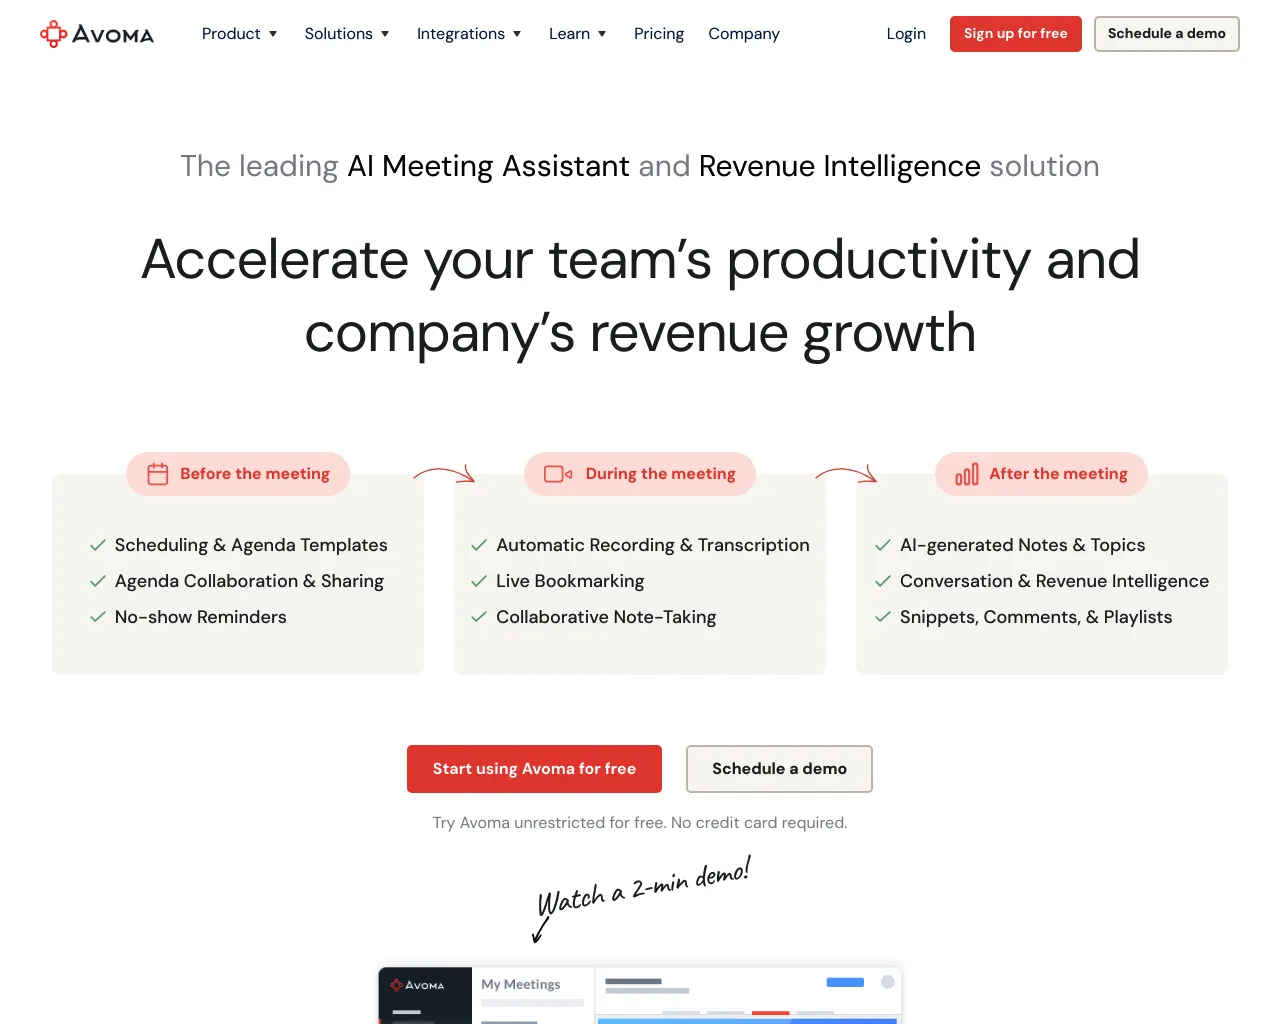 Accelerate your team’s productivity and company’s revenue growth